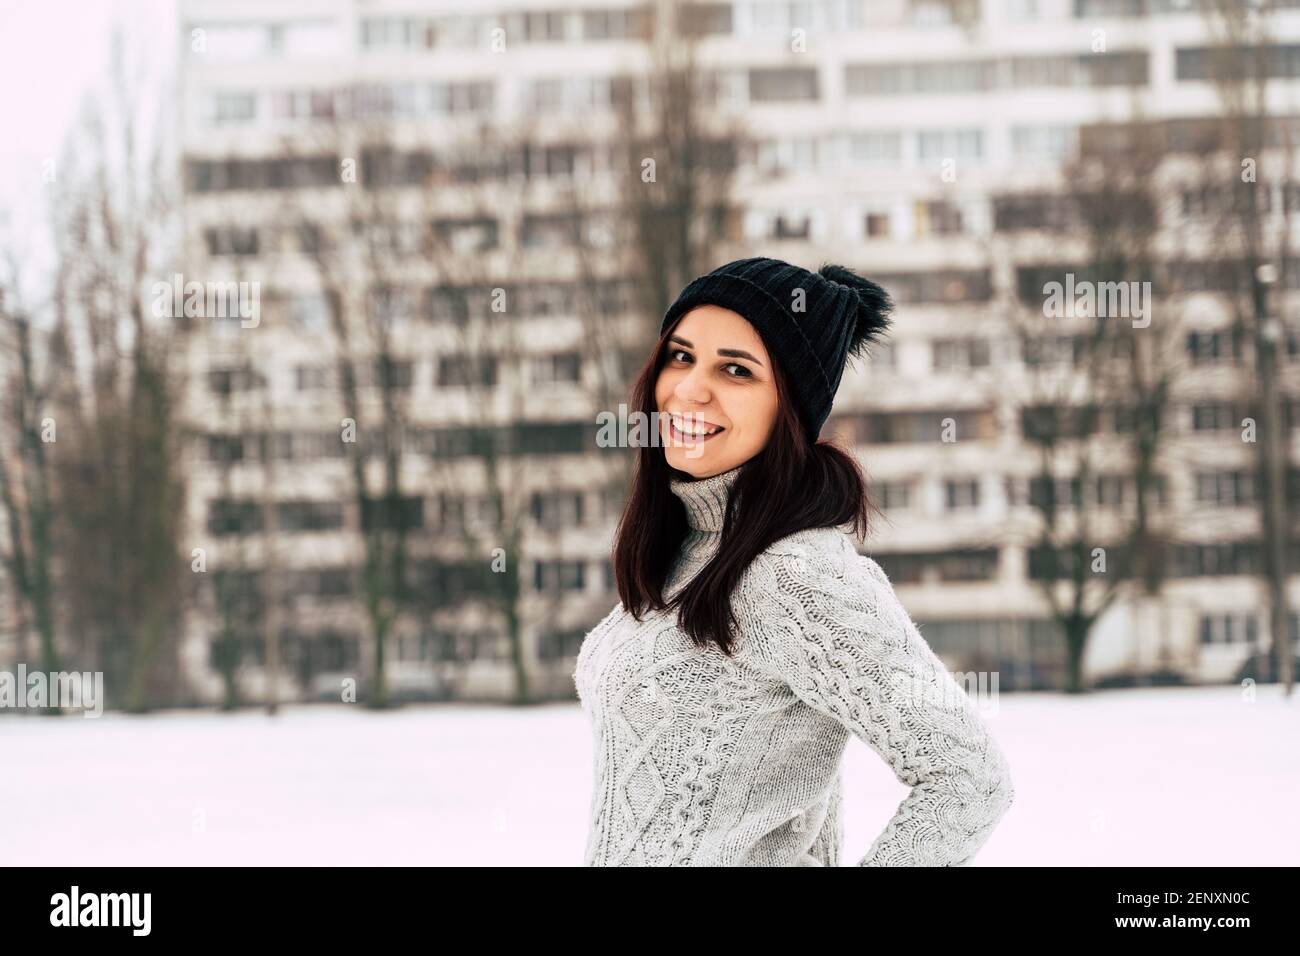 Young, beautiful woman with winter cap and gray sweater smiling and laughing while standing outside in winter. Stock Photo